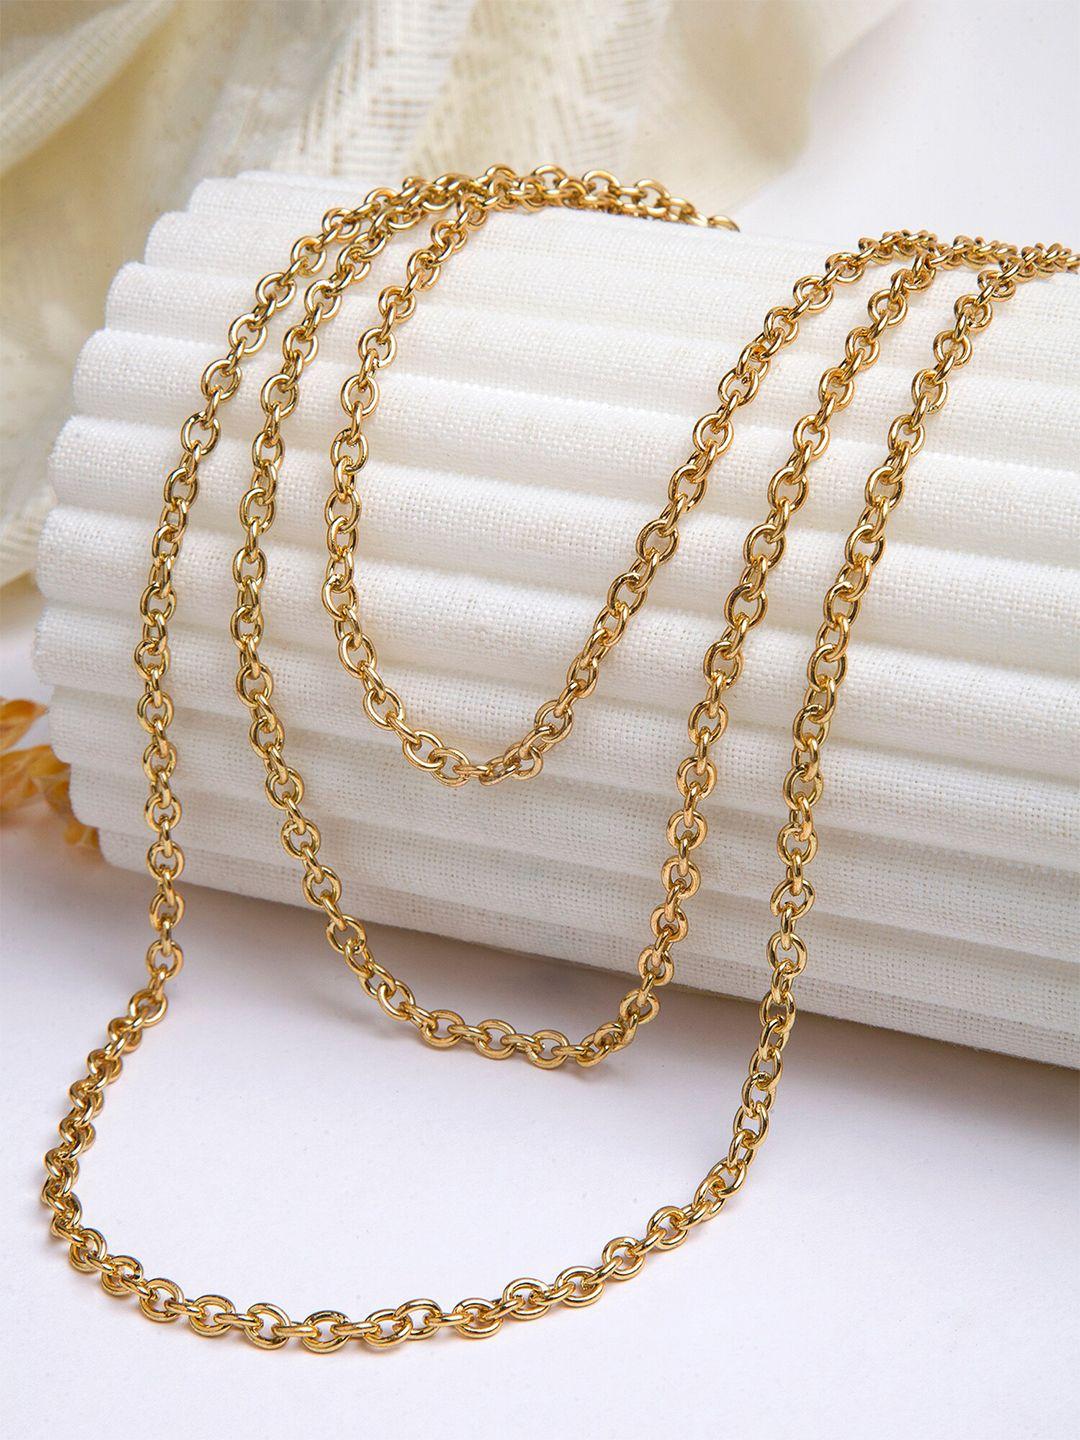 karatcart gold-toned gold-plated layered chain